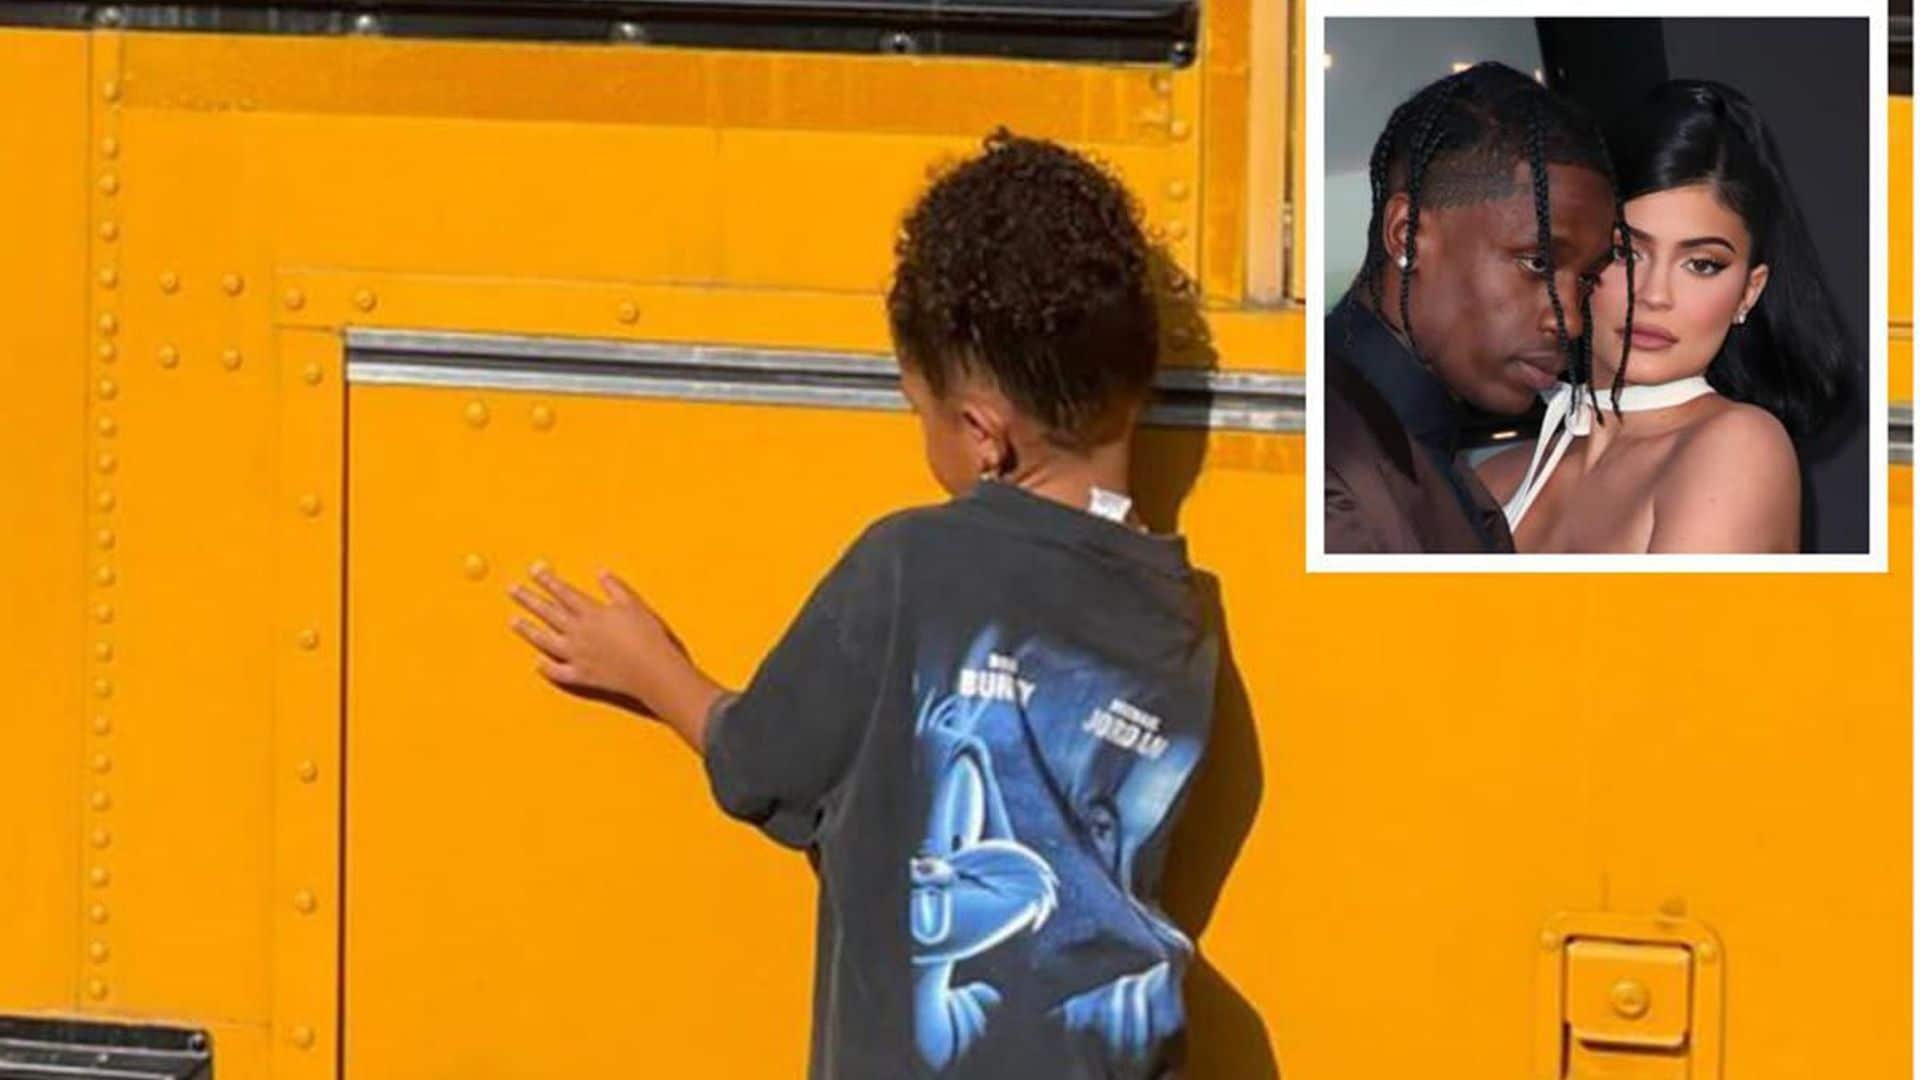 Stormi Webster pretends to ride in a yellow school bus